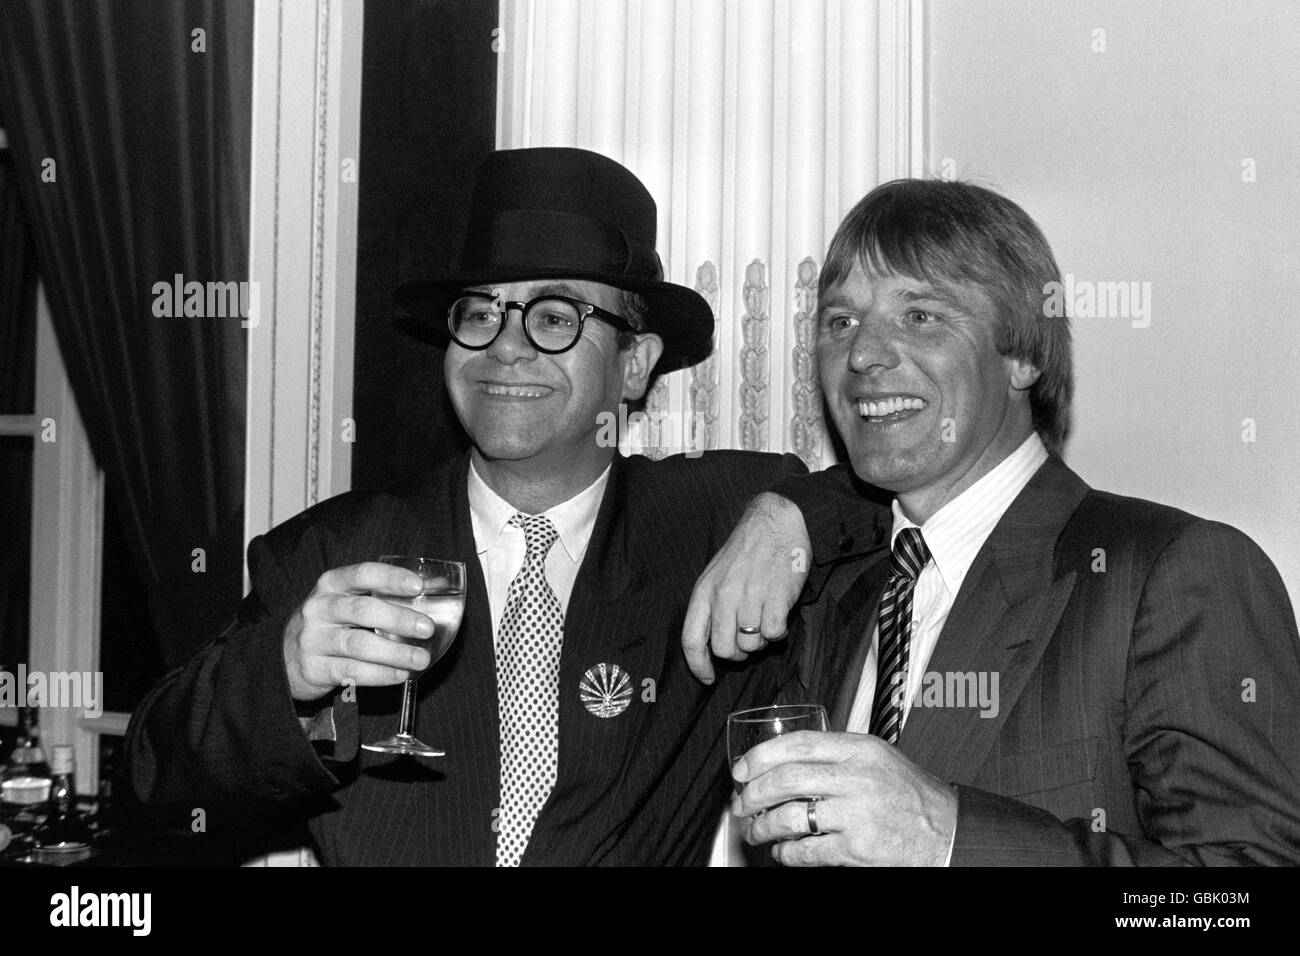 Watford Football Club's pop superstar chairman Elton John and new manager Dave Bassett, who walked out of Wimbledon, celebrate at a reception in London on the eve of the club's tour of China. Stock Photo